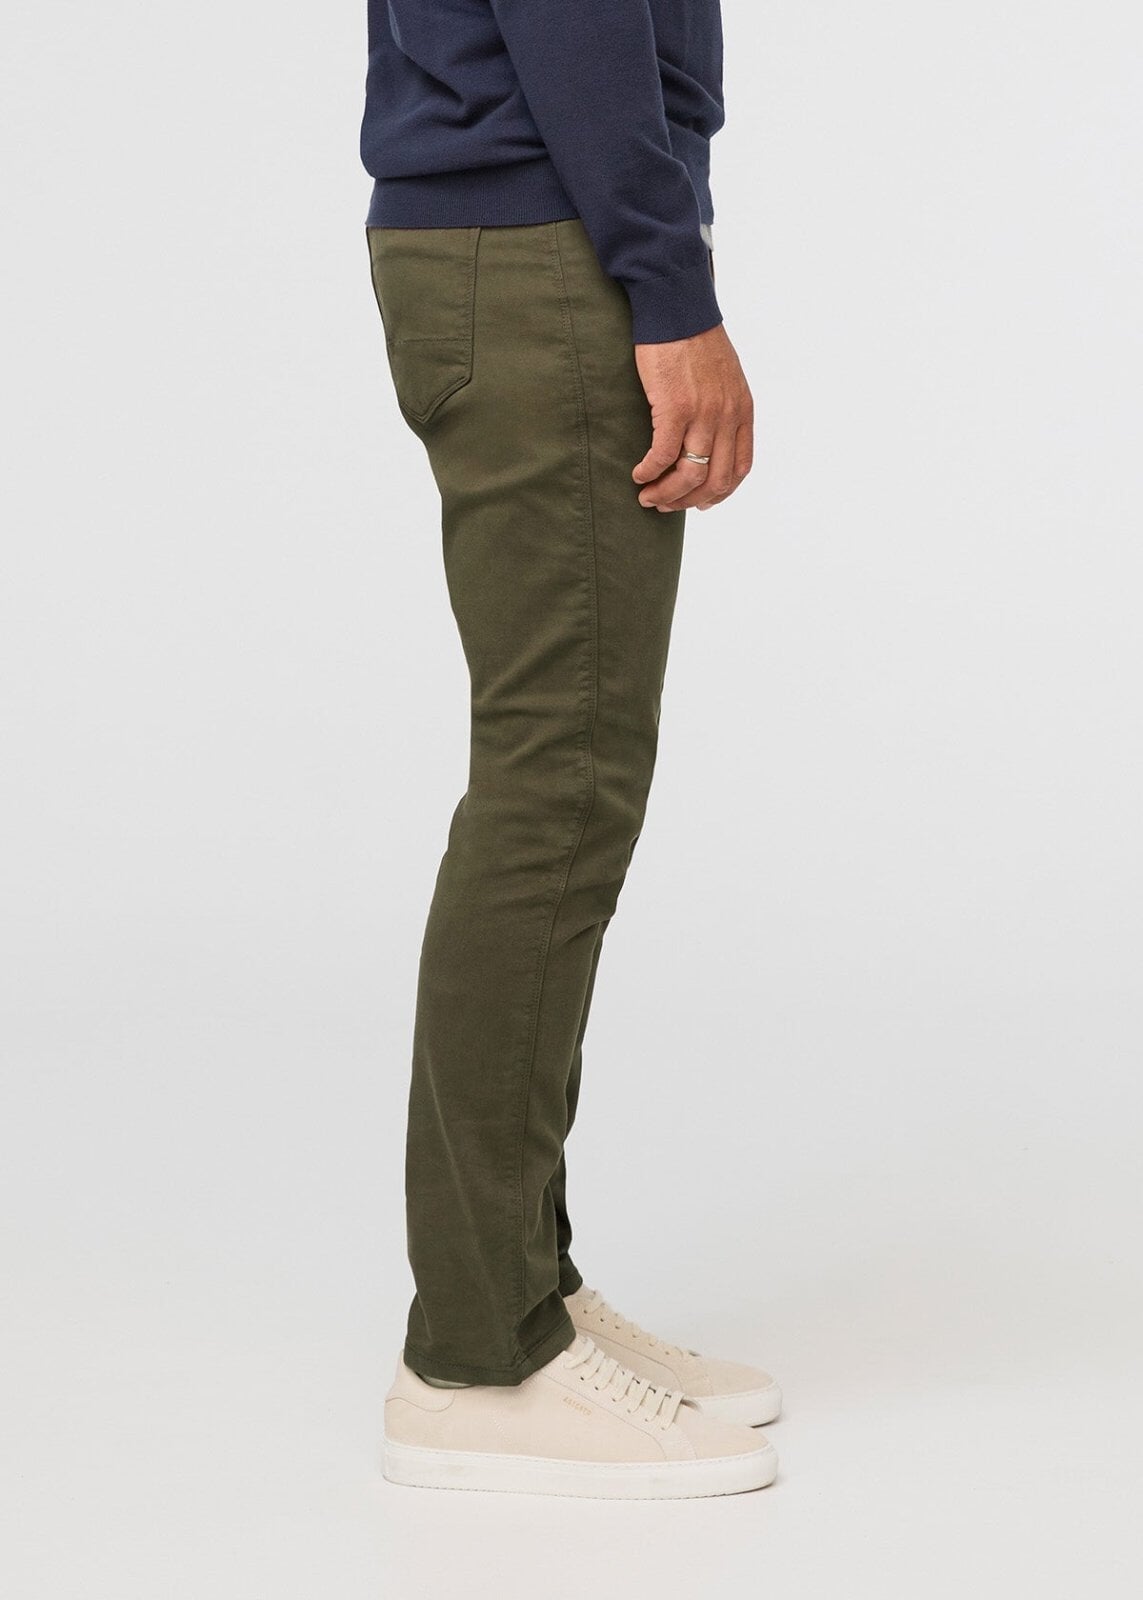 man wearing a army green Relaxed Fit Sweatpant side